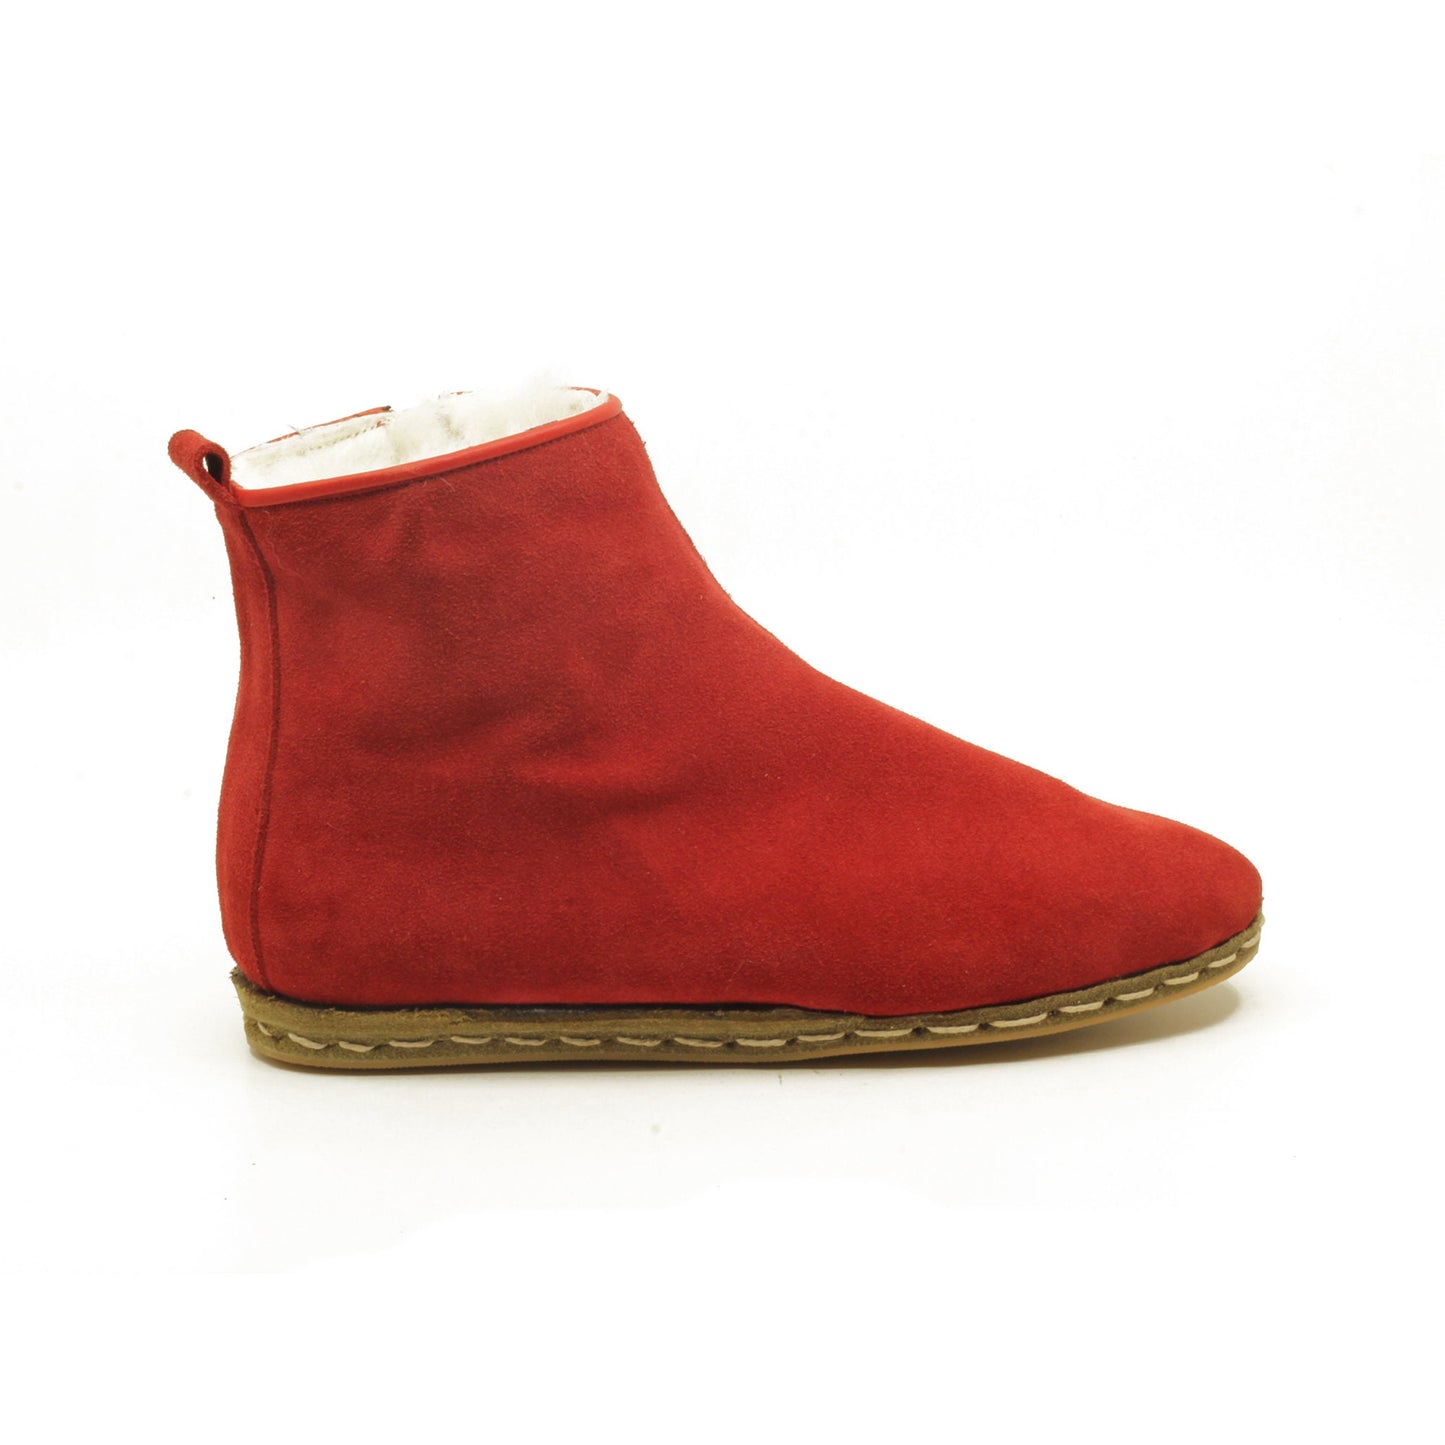 Women's Boot, Real Tuscan Fur Inside, All Leather, Red